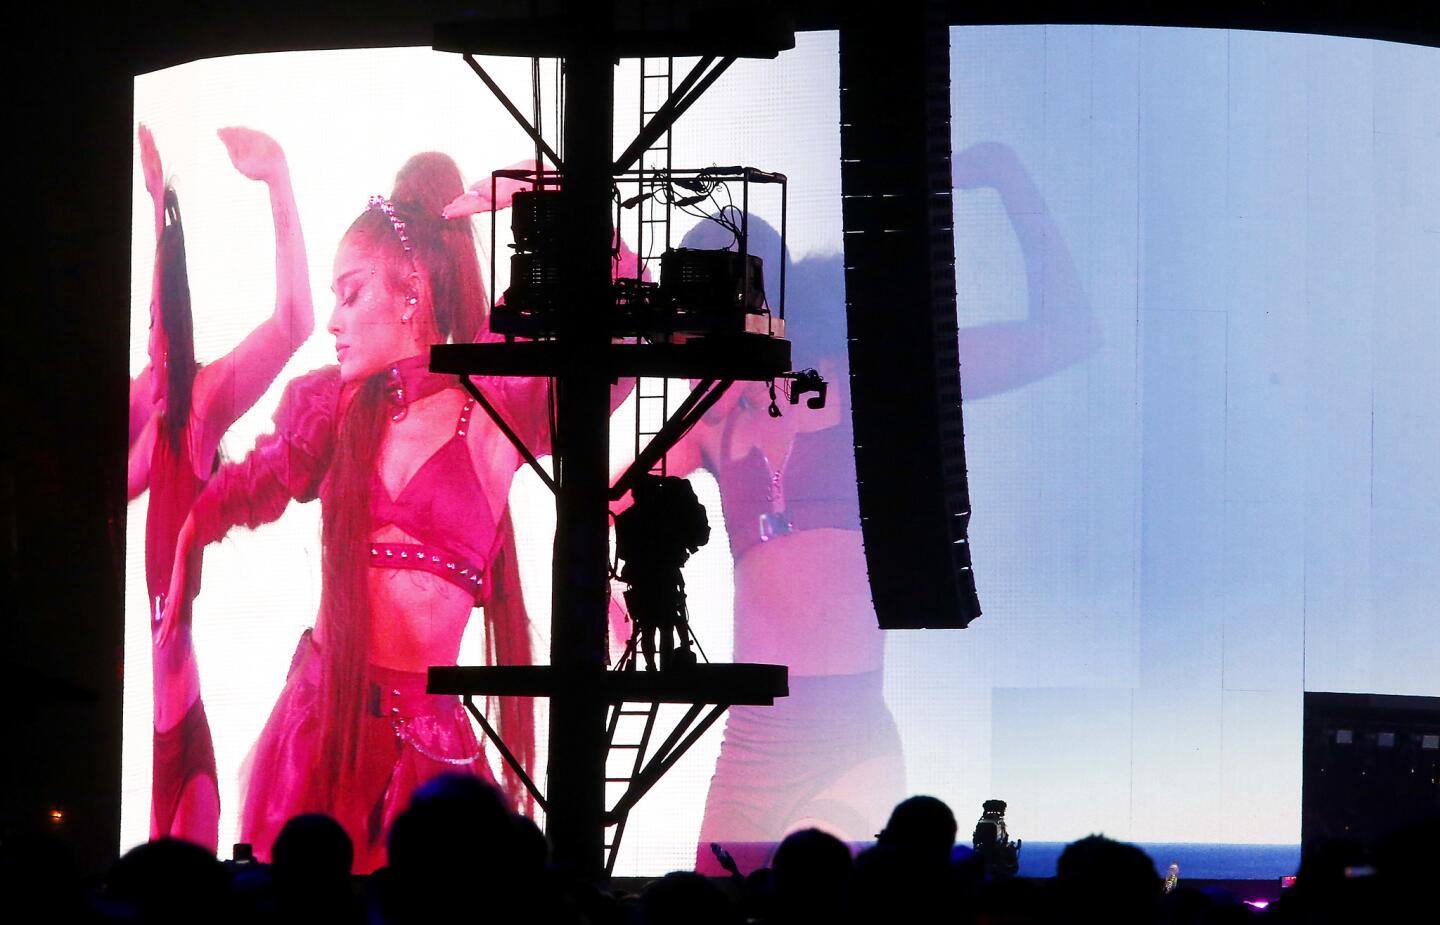 The media were not allowed to photograph the Ariana Grande concert at the Coachella Valley Music and Arts Festival, so Los Angeles Times photographer Luis Sinco instead photographed a camera operator at work recording the concert.